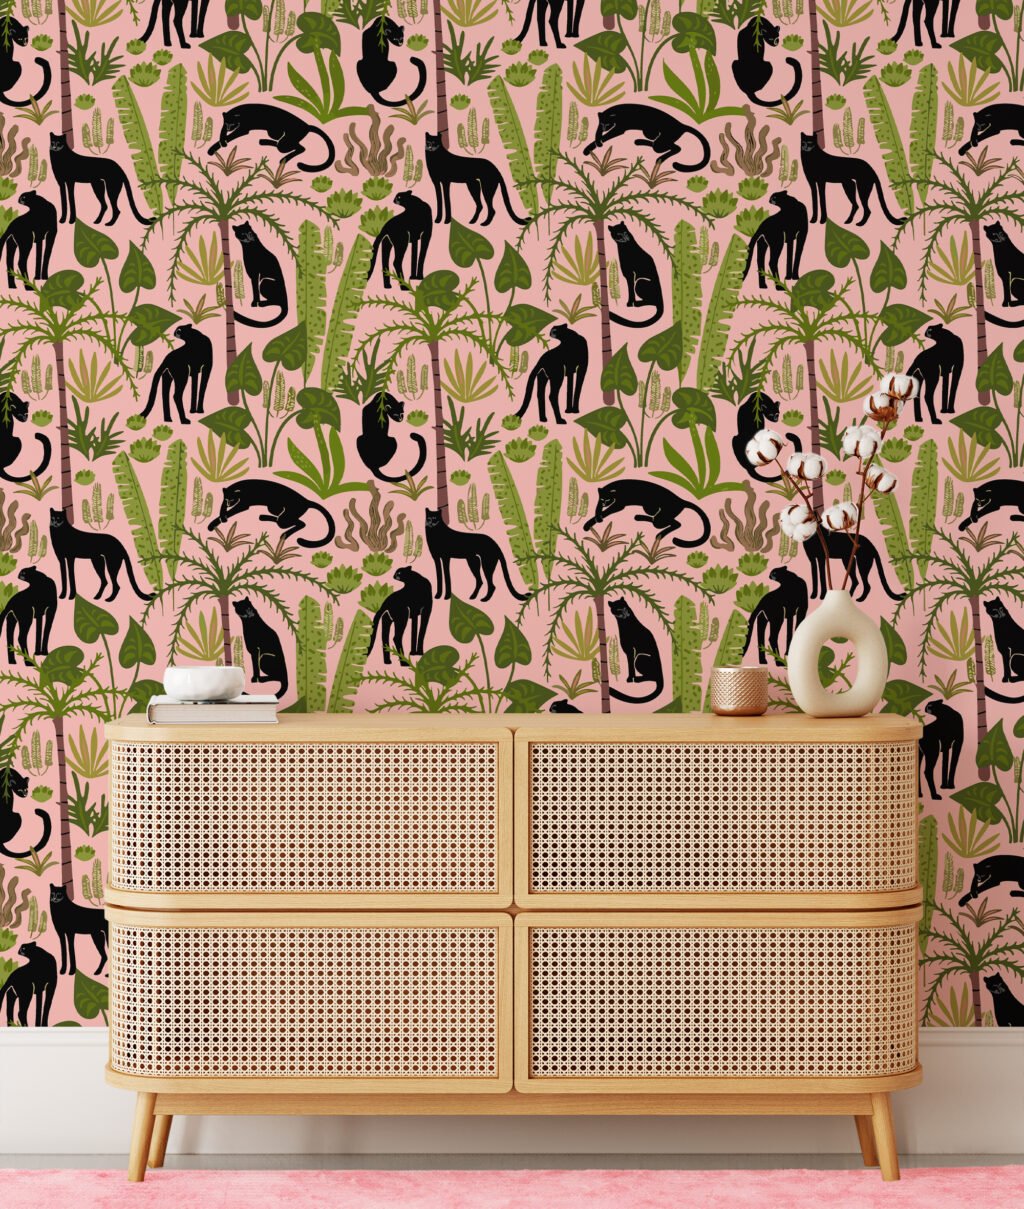 Flat Art Pink Jungle With Panthers Illustration Wallpaper, Prowling Black Panthers Peel & Stick Wall Mural